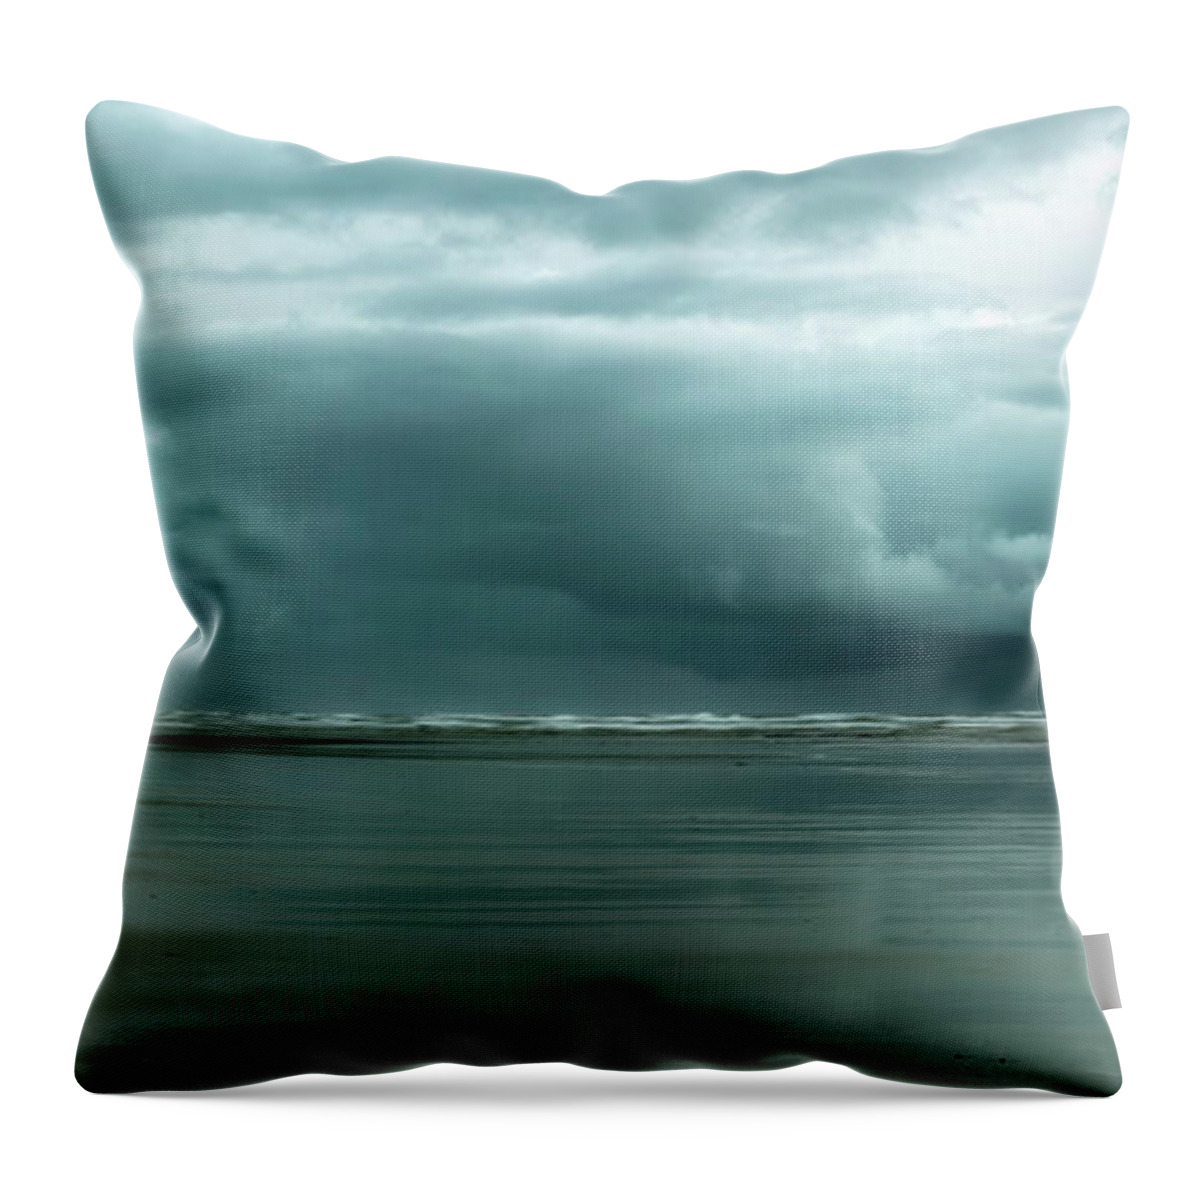 Roosevelt Throw Pillow featuring the photograph Roosevelt's Mood by Ryan Manuel